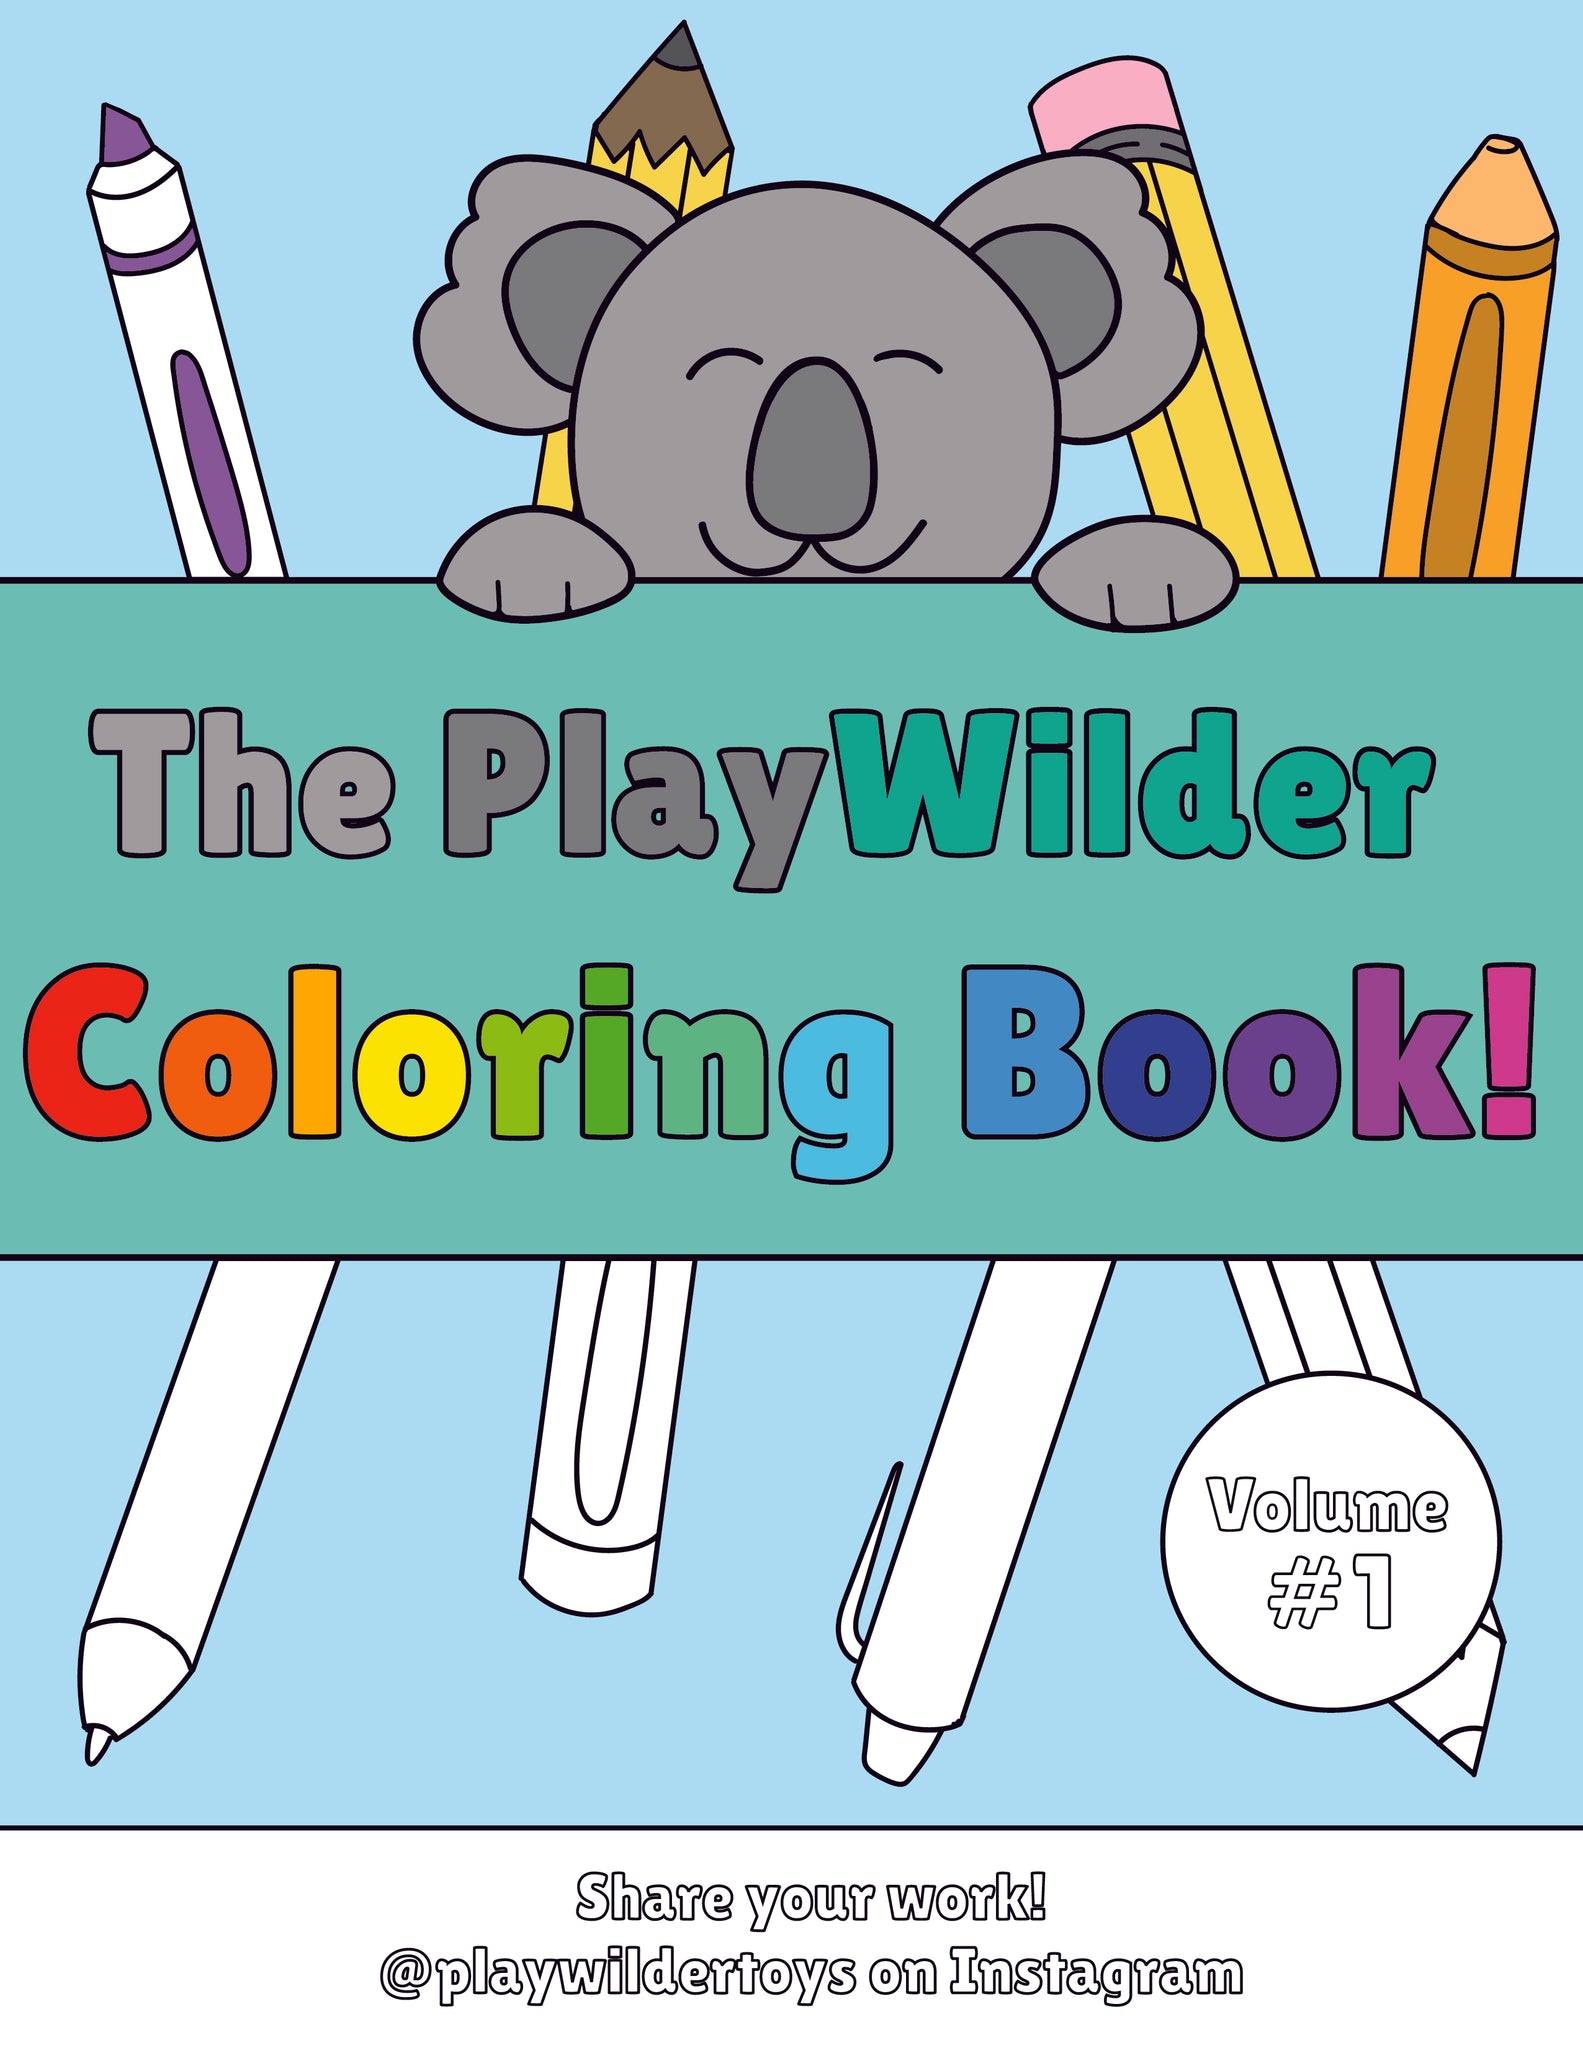 PlayWilder Coloring Book